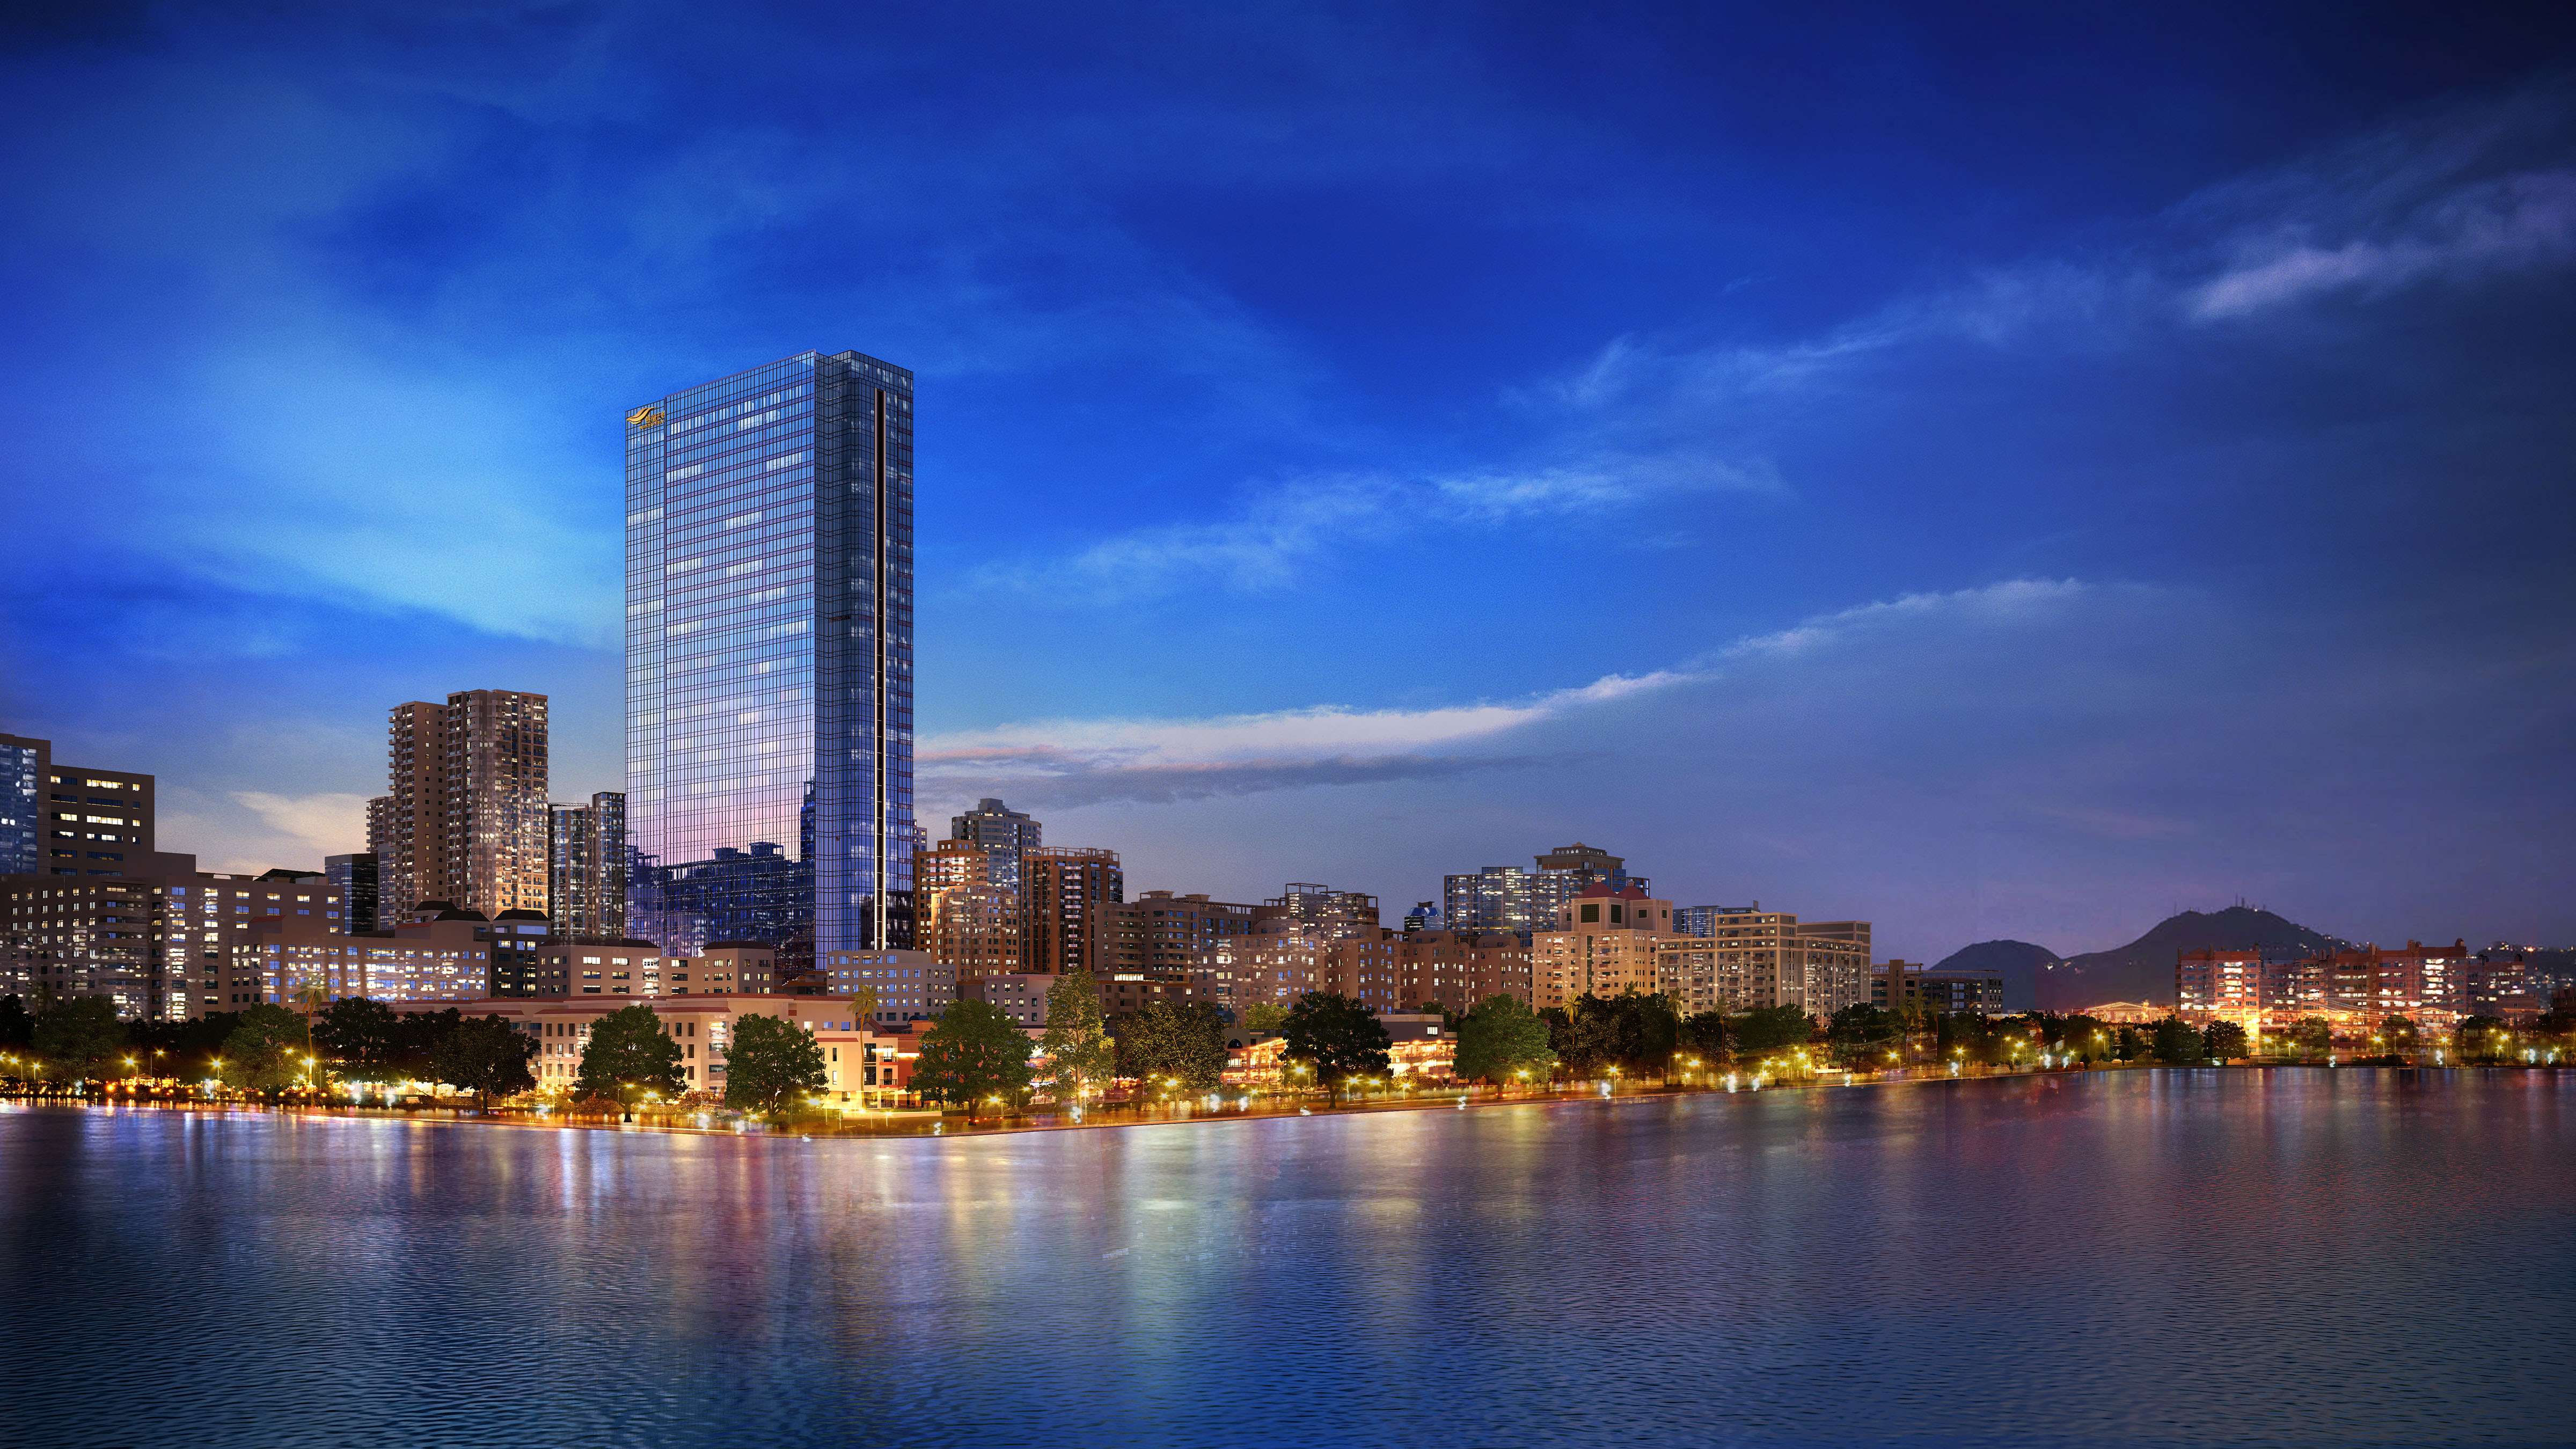 Sino Group’s Mayfair by The Lake development offers scenic views in Xiamen’s prime Hubin North district.